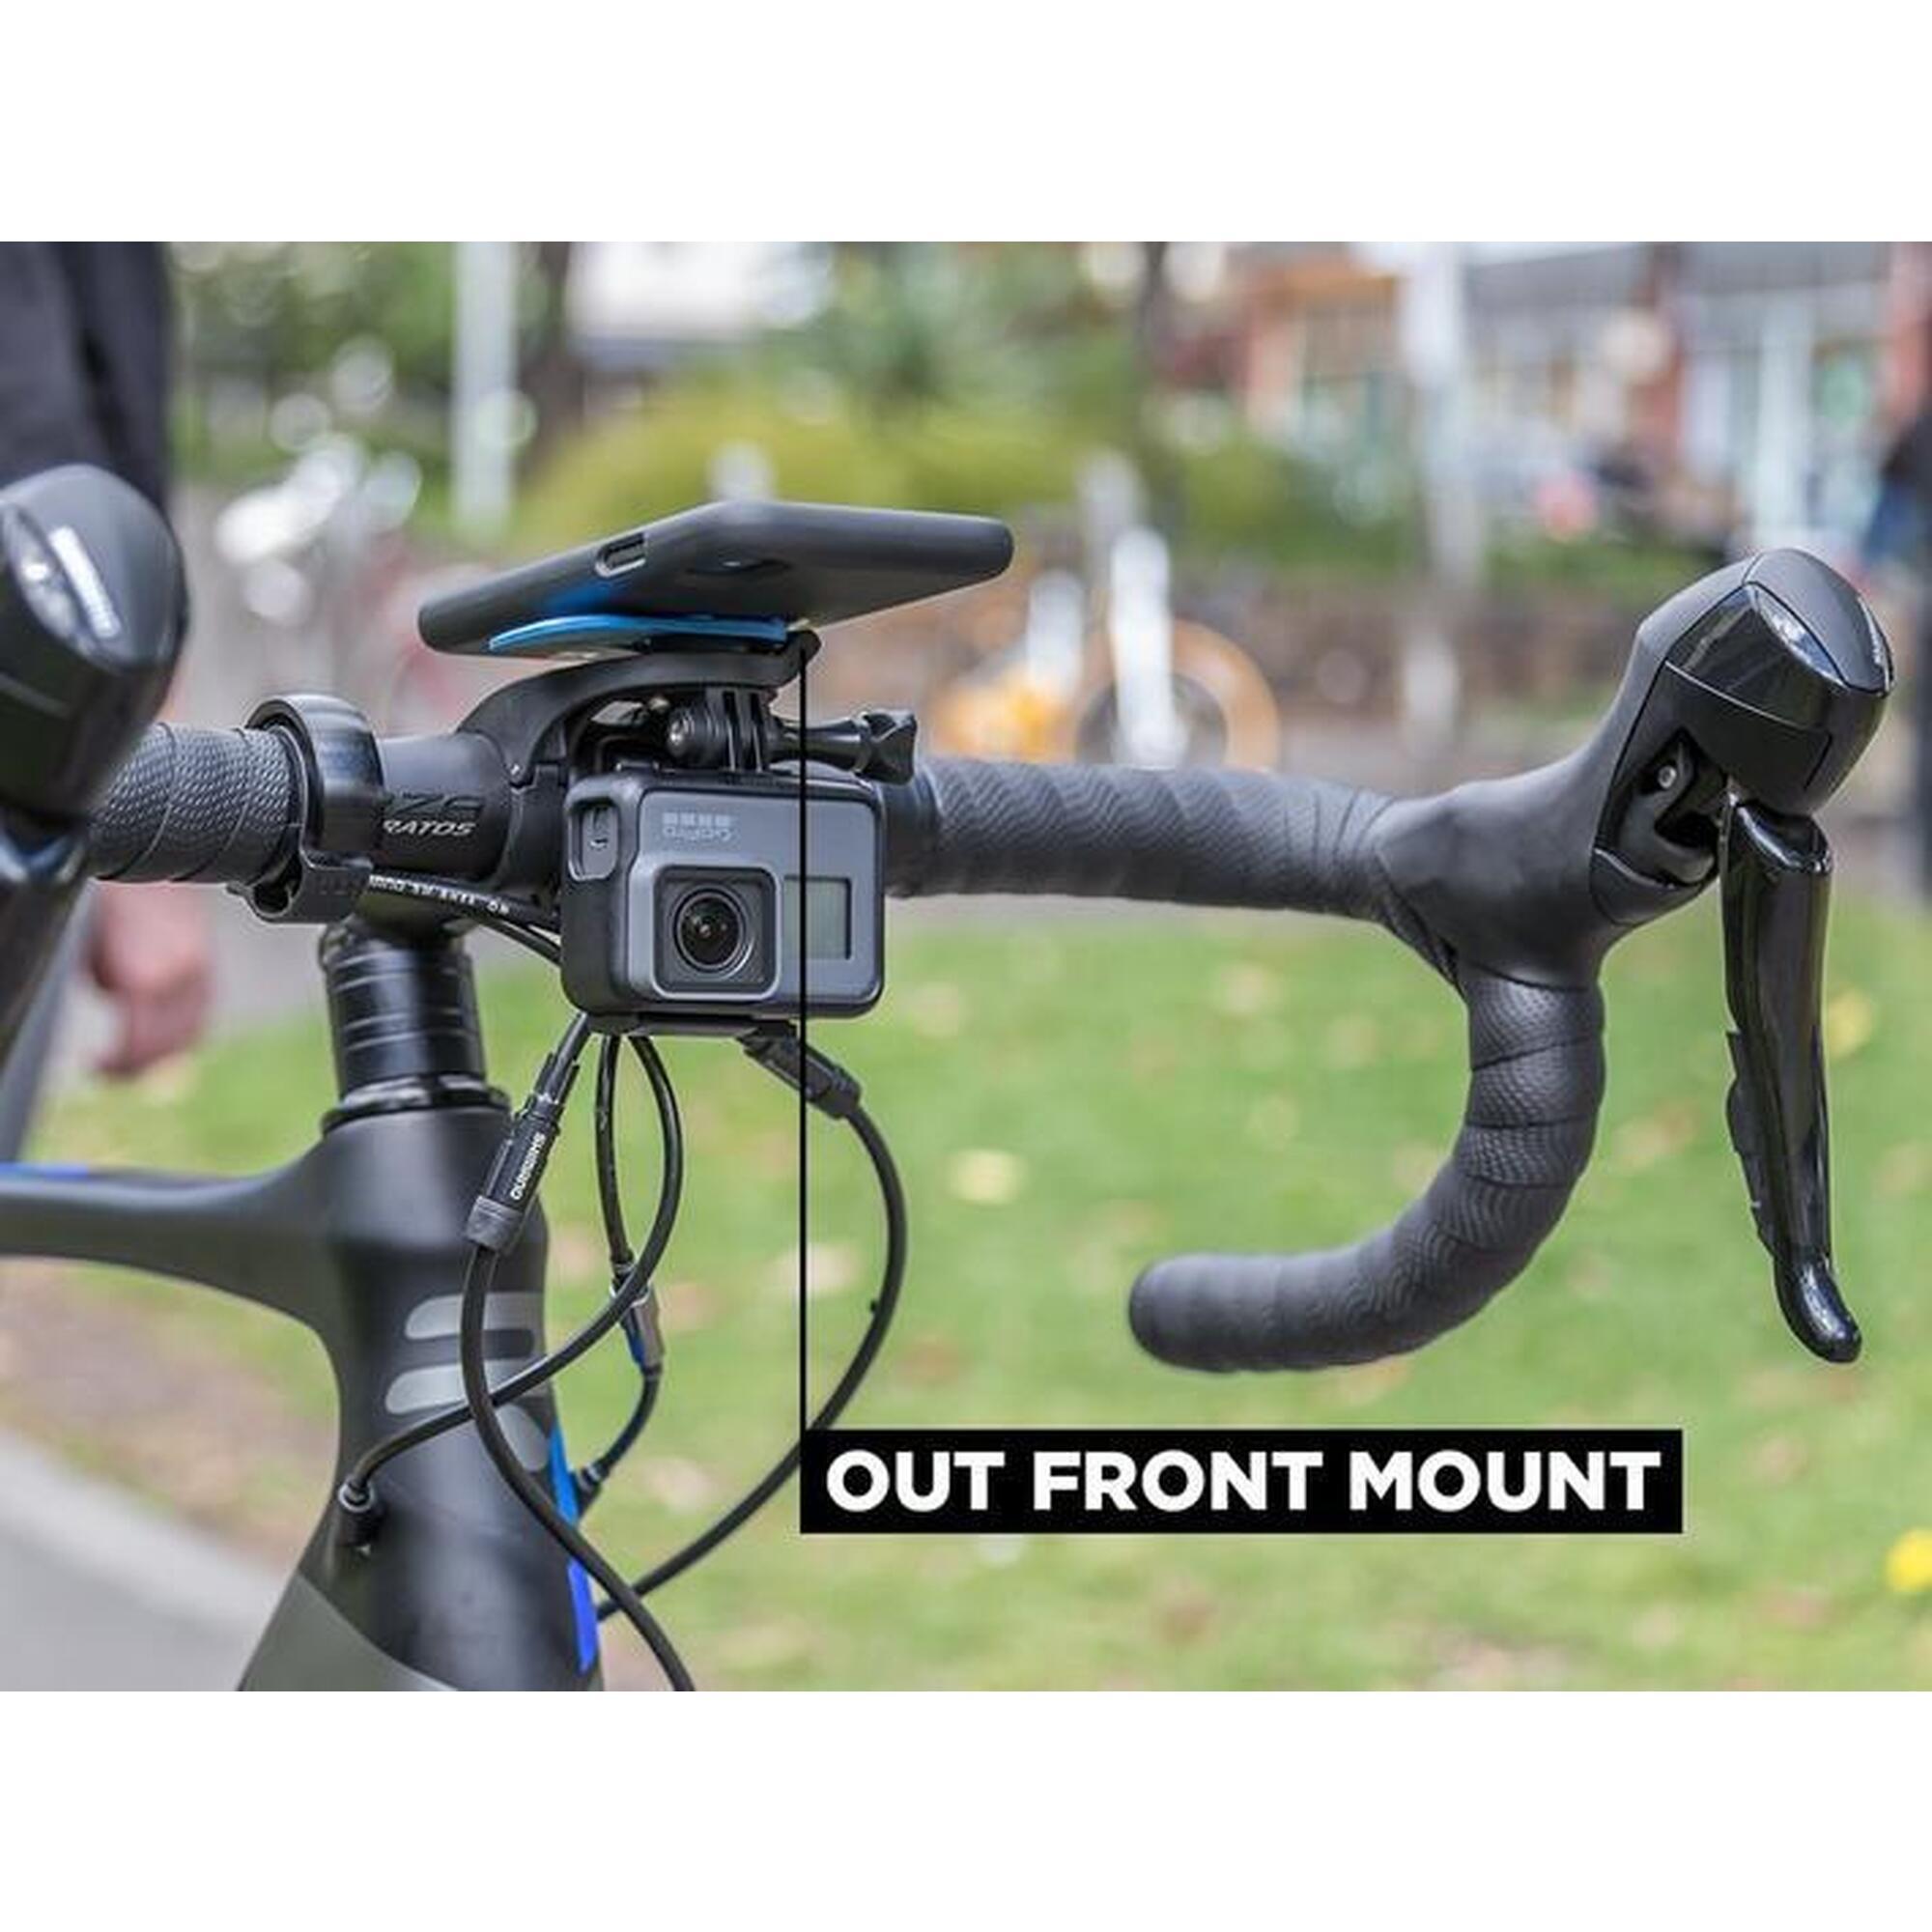 Out Front Mount Cycling Smartphone Mount